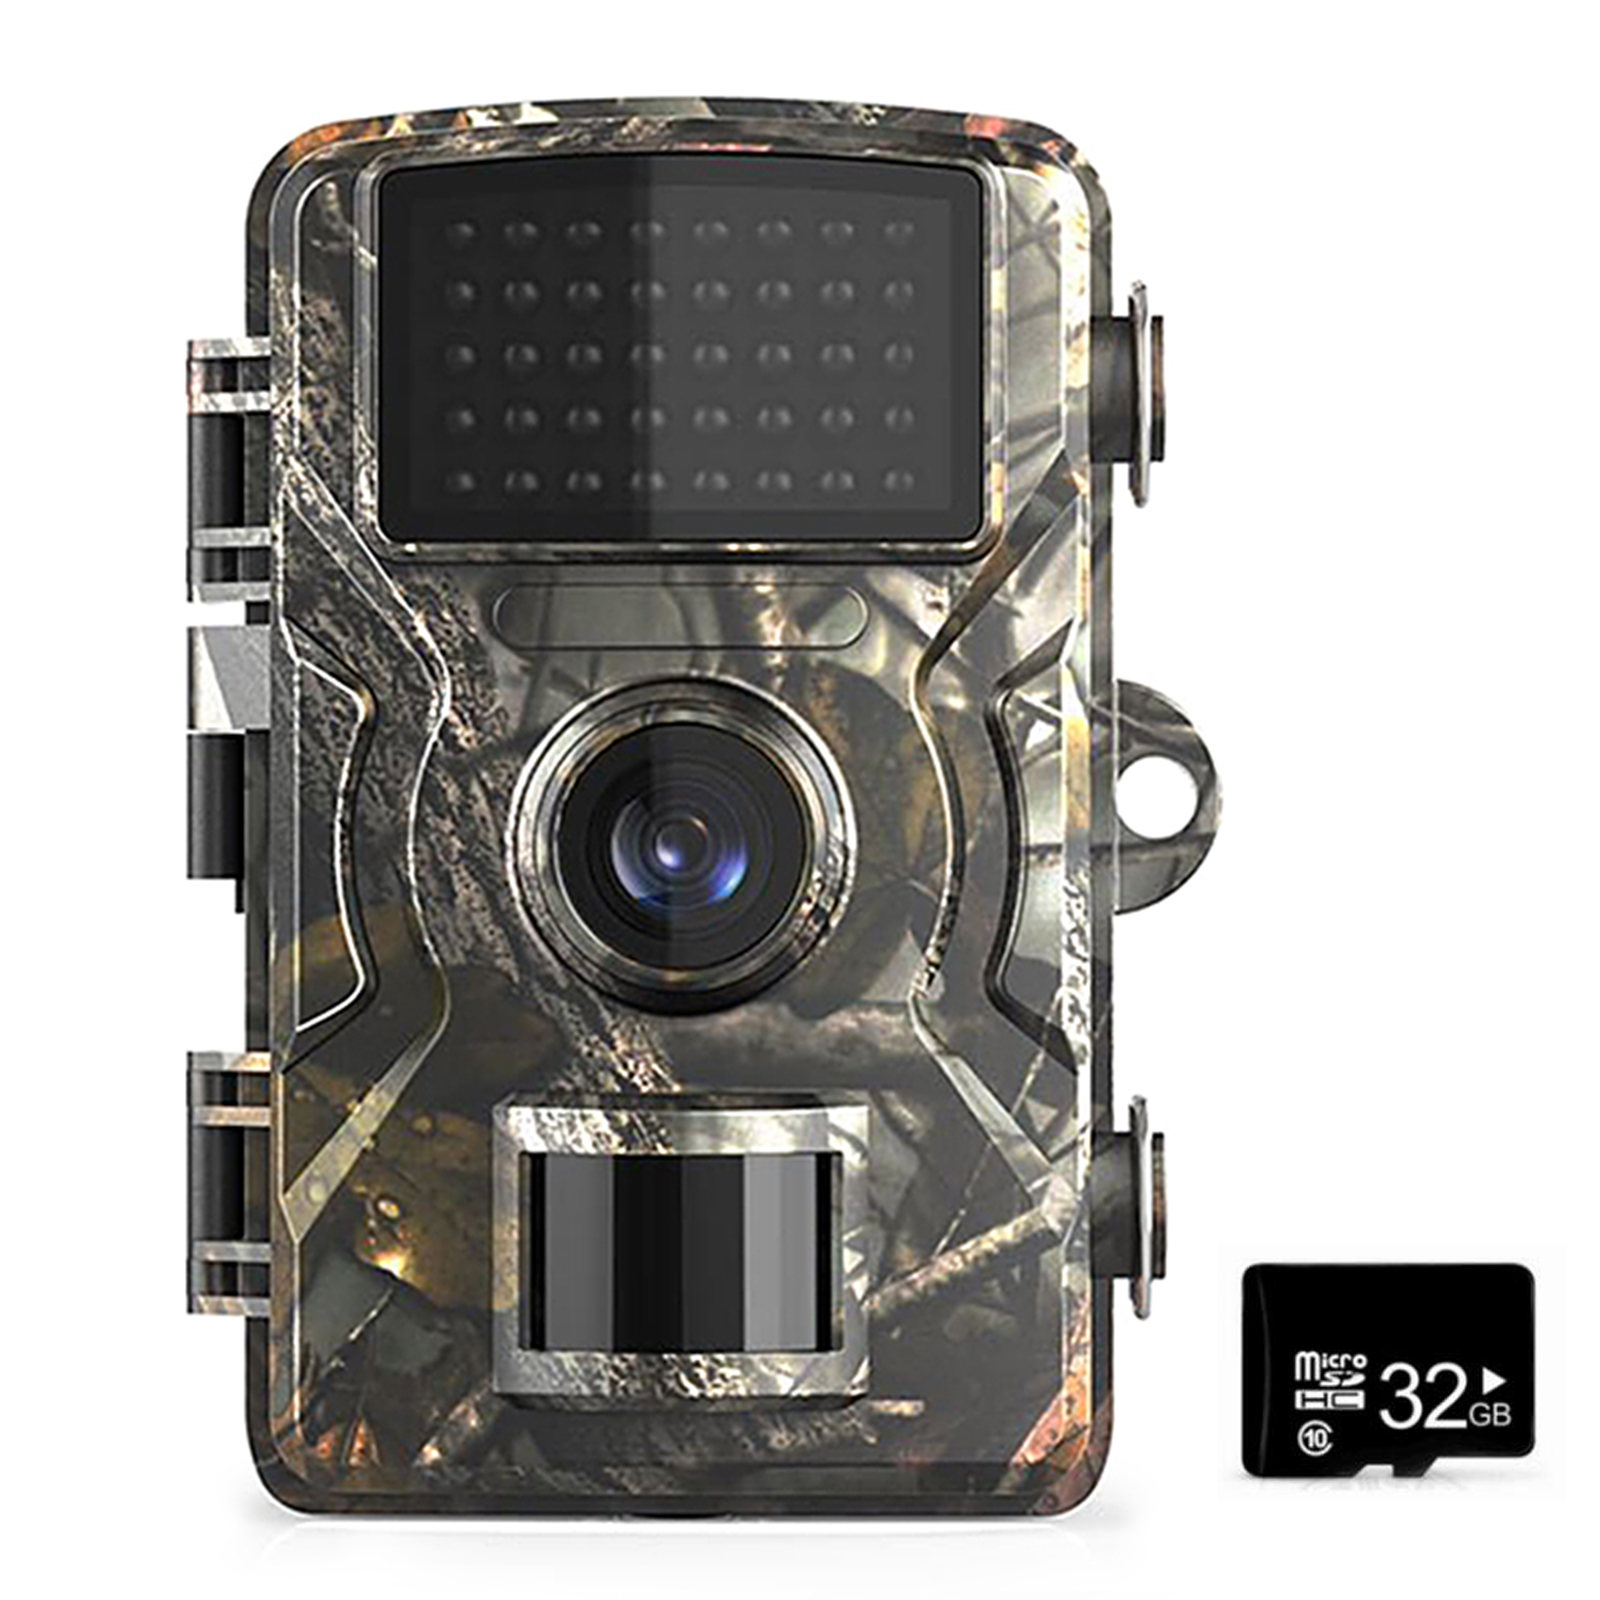 Details about  / 1080P Mini Hunting Trail Camera Wildlife 20MP Scouting Cam Night Vision